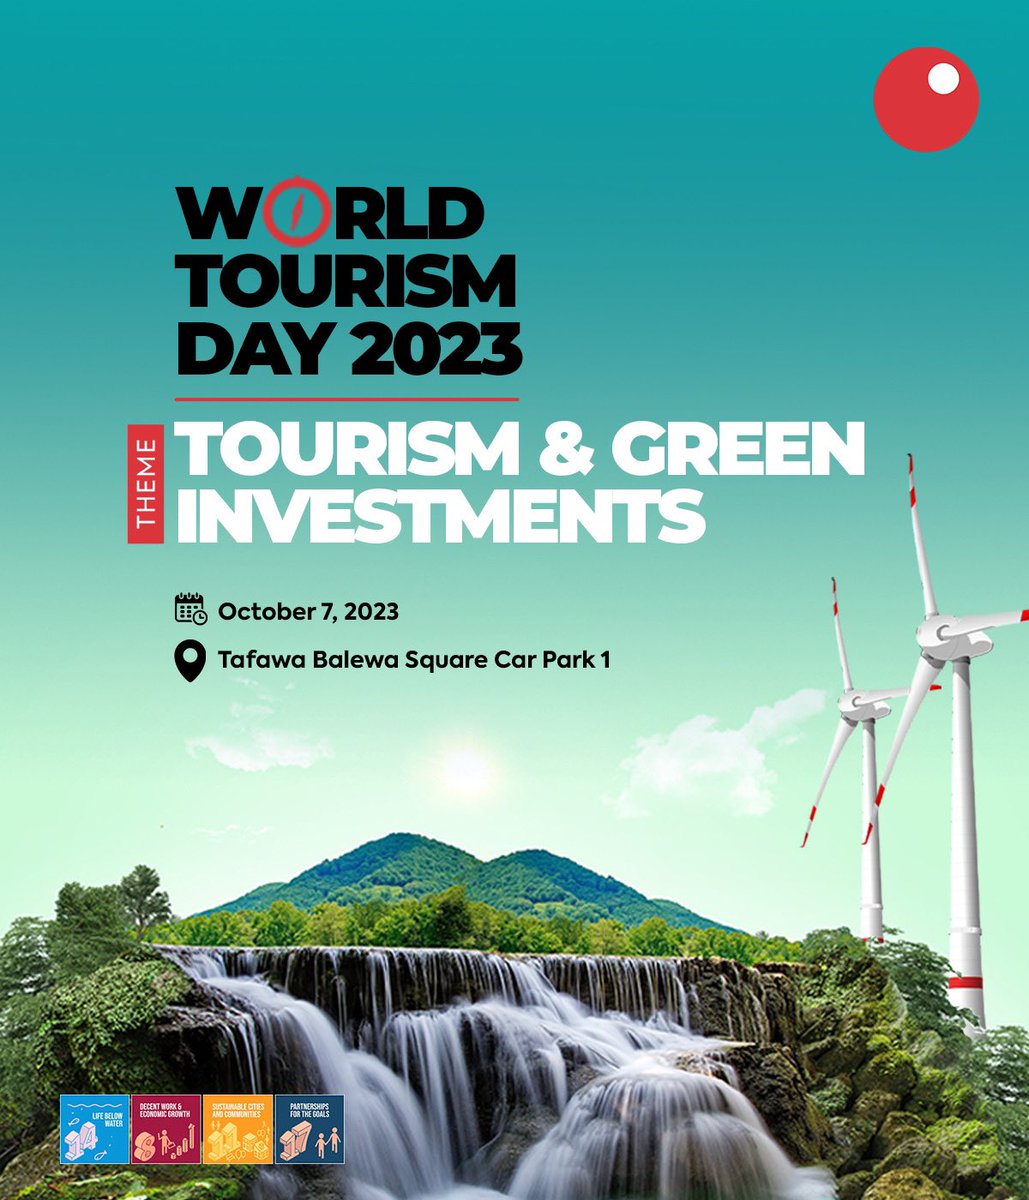 Are you ready for the thrill?

Join us for an incredible experience at our World Tourism Day celebration.

#WorldTourismDay #SaveTheDate #GreenInvestment